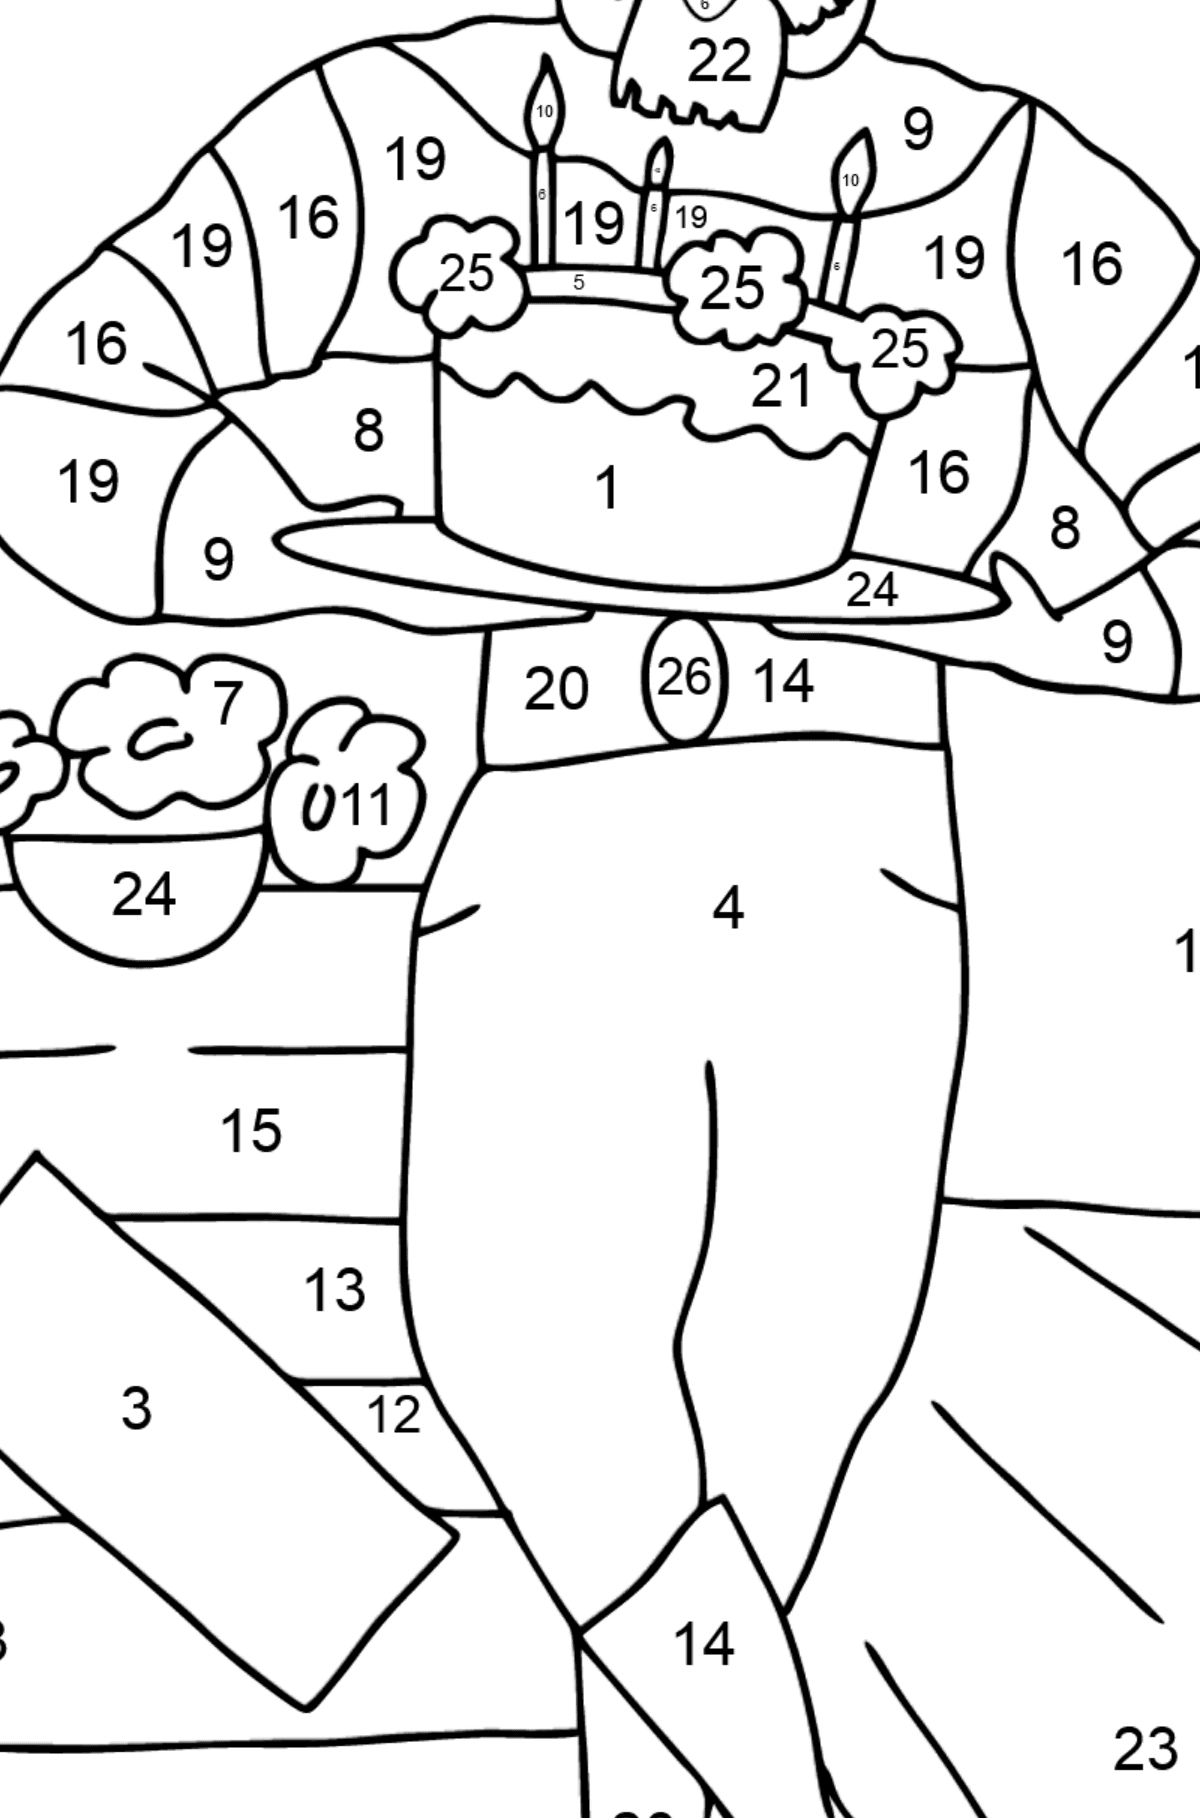 Coloring Page - A Pirate is Celebrating his Birthday - Coloring by Numbers for Kids